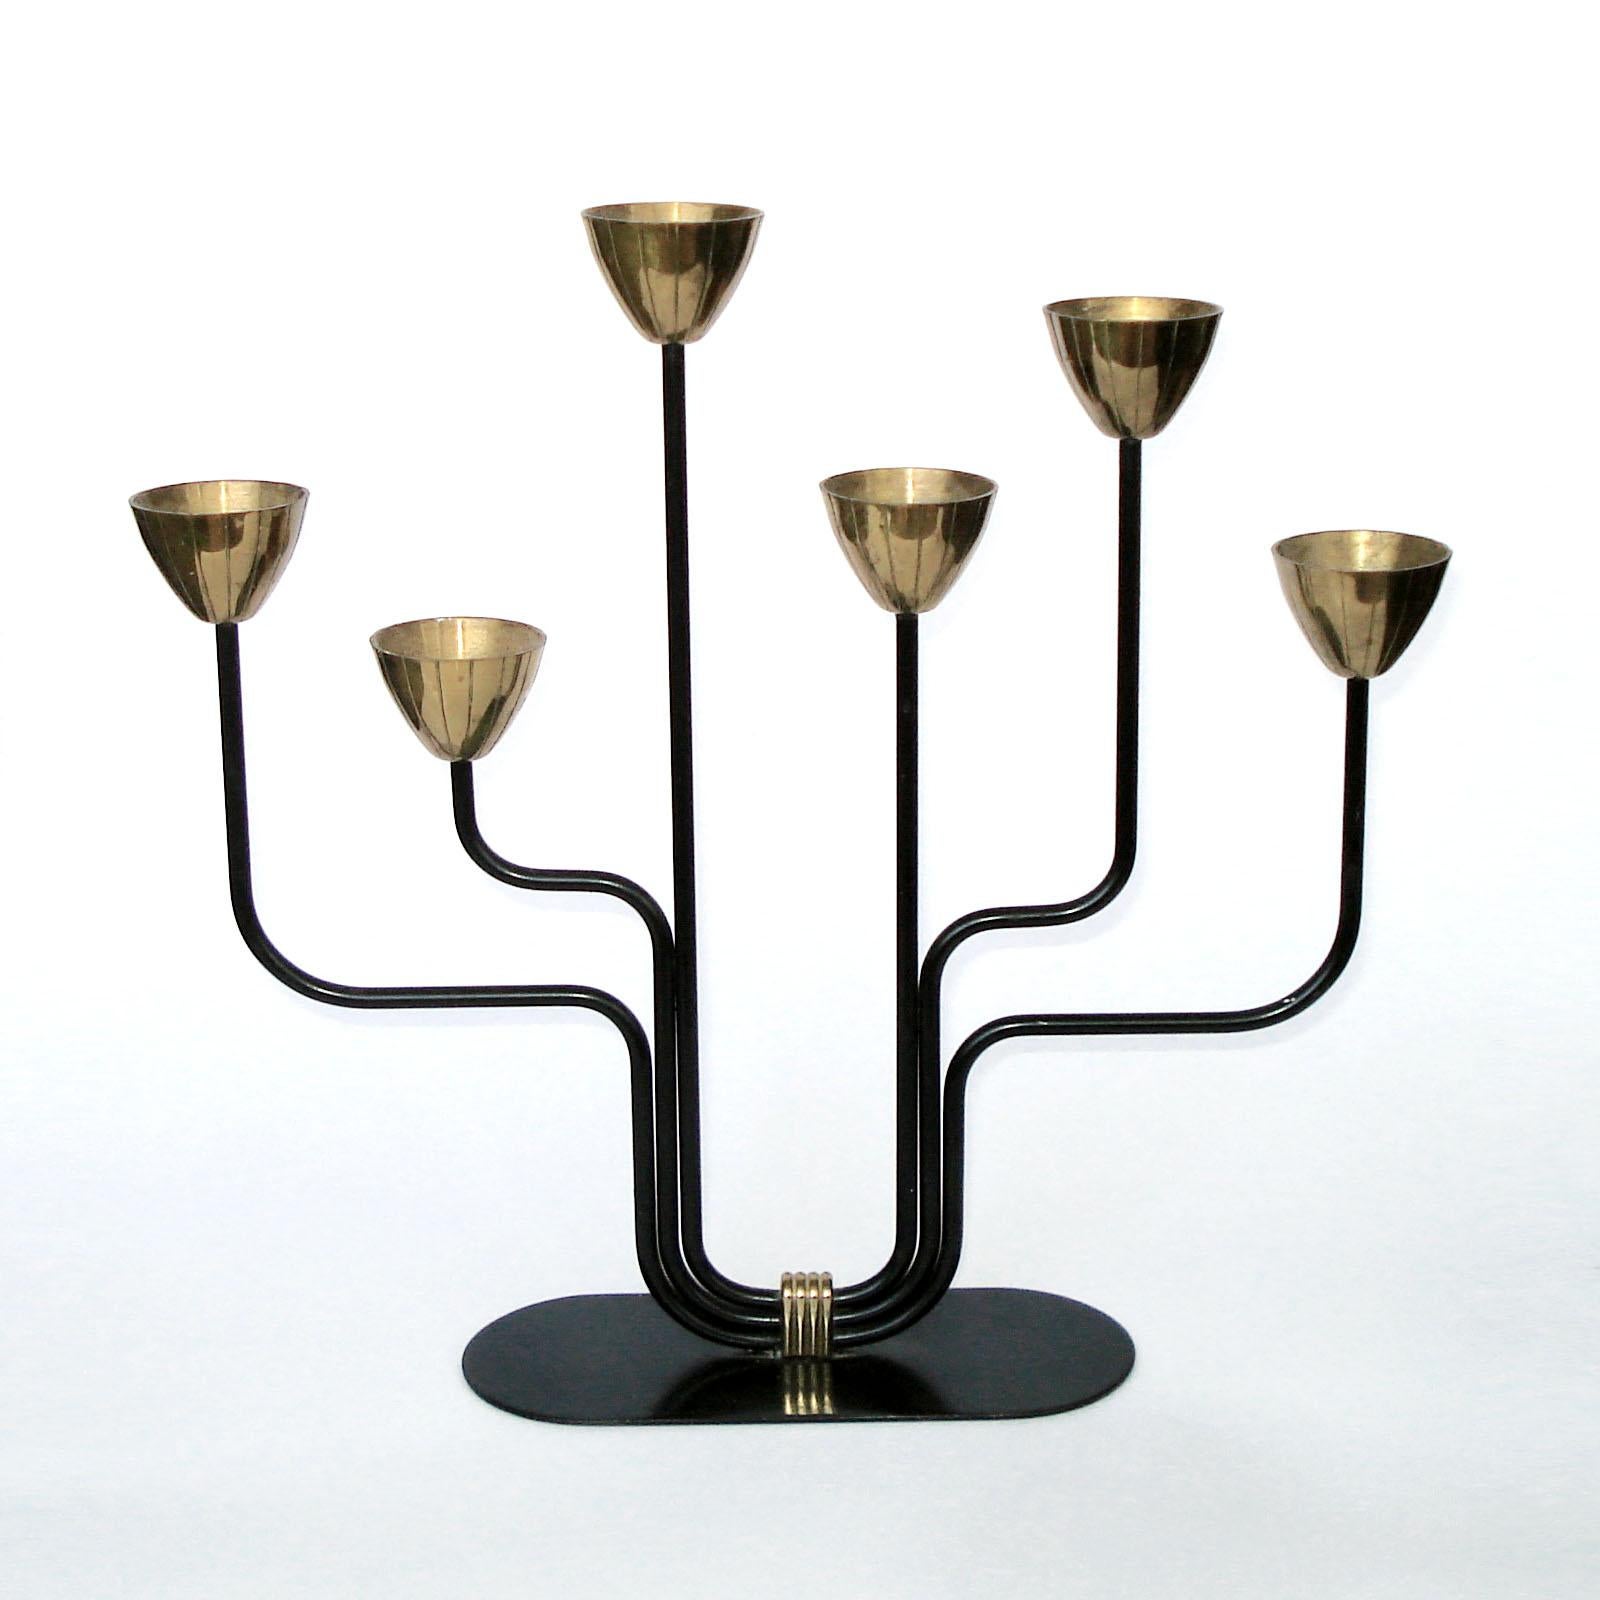 Brass and blackened metal candelabra for thin candles. Designed by Gunnar Ander for Ystad Metall Sweden. Stamped “Ystad Metall Made In Sweden”. Very good used condition, normal wear.
Dimensions: 28.5 x 6.5 x 26.5 cm.

